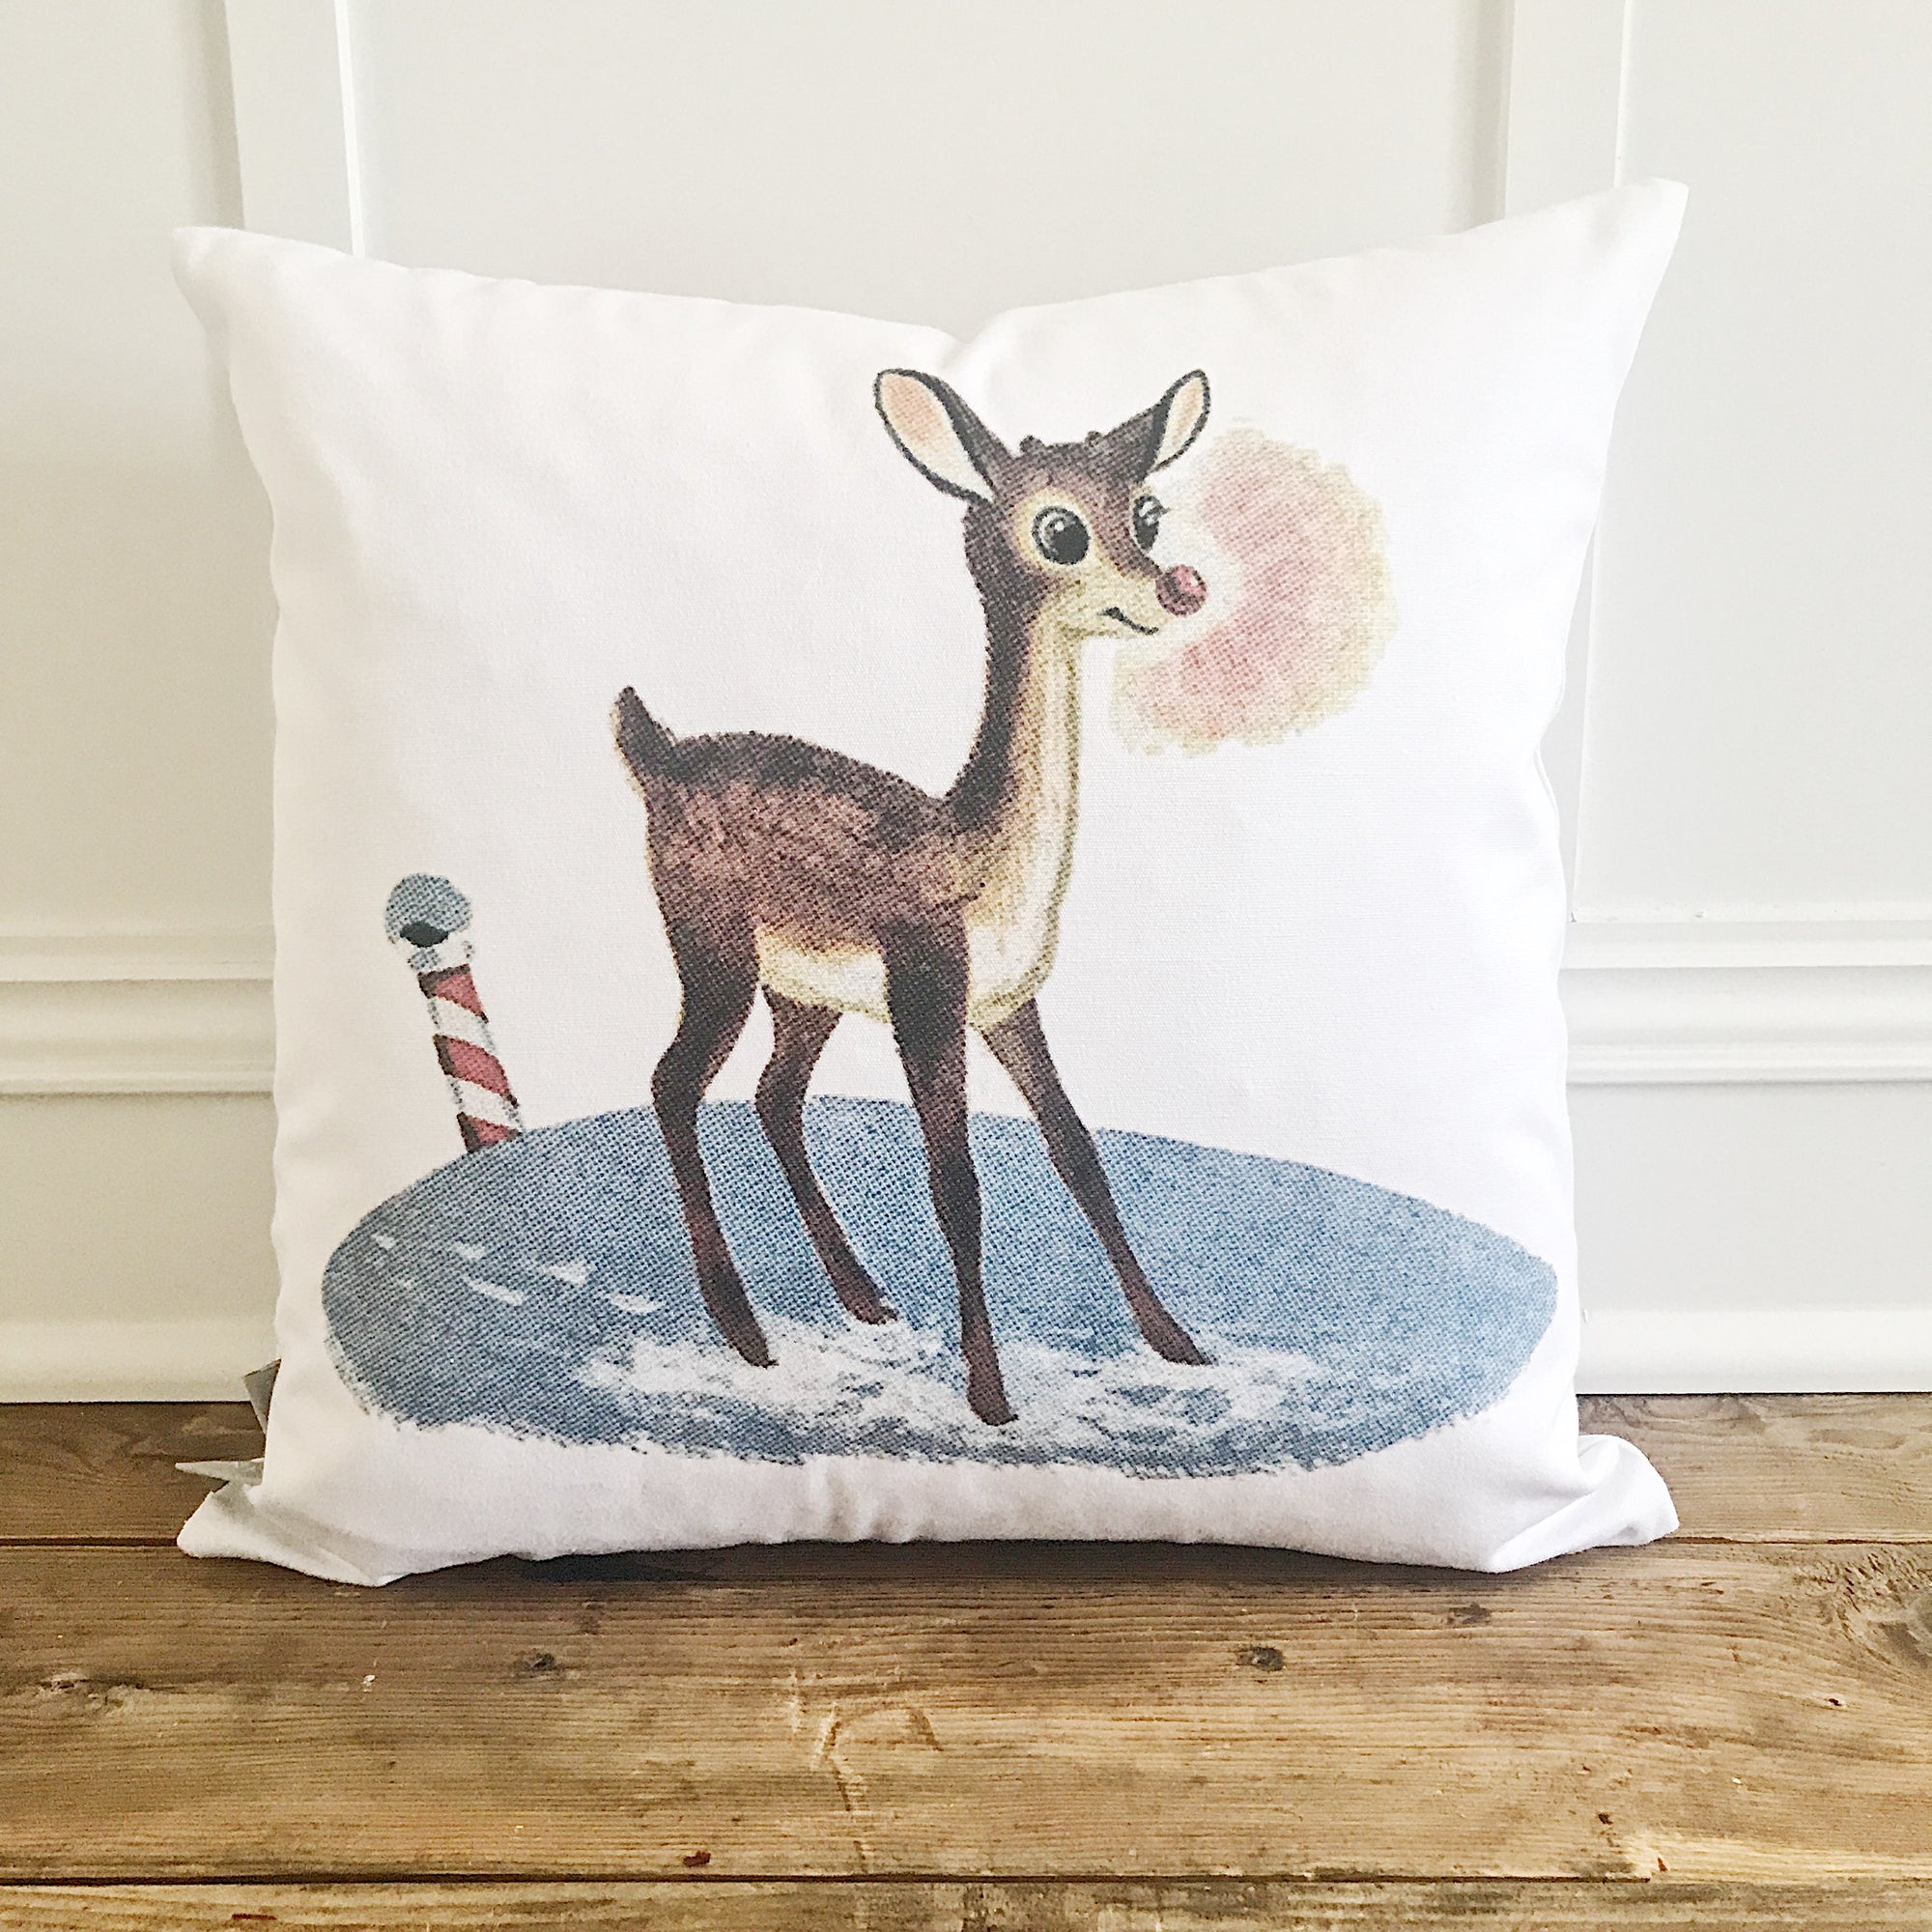 Vintage North Pole Rudolph Pillow Cover - Linen and Ivory